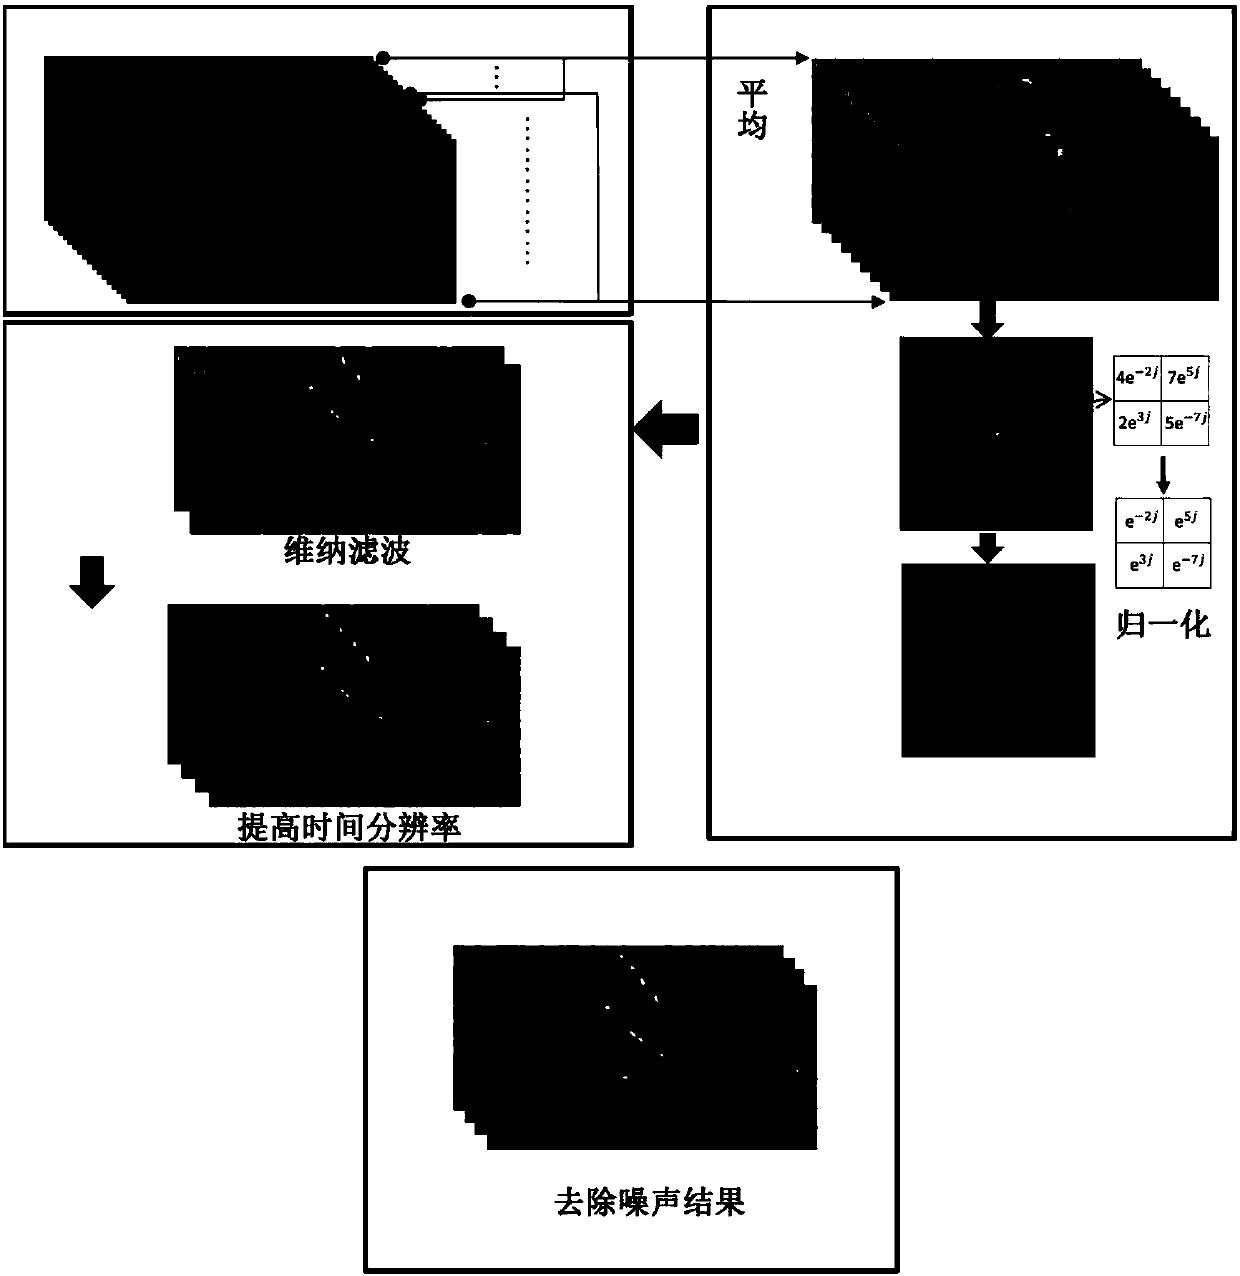 Low signal to noise ratio image reconstruction method and system